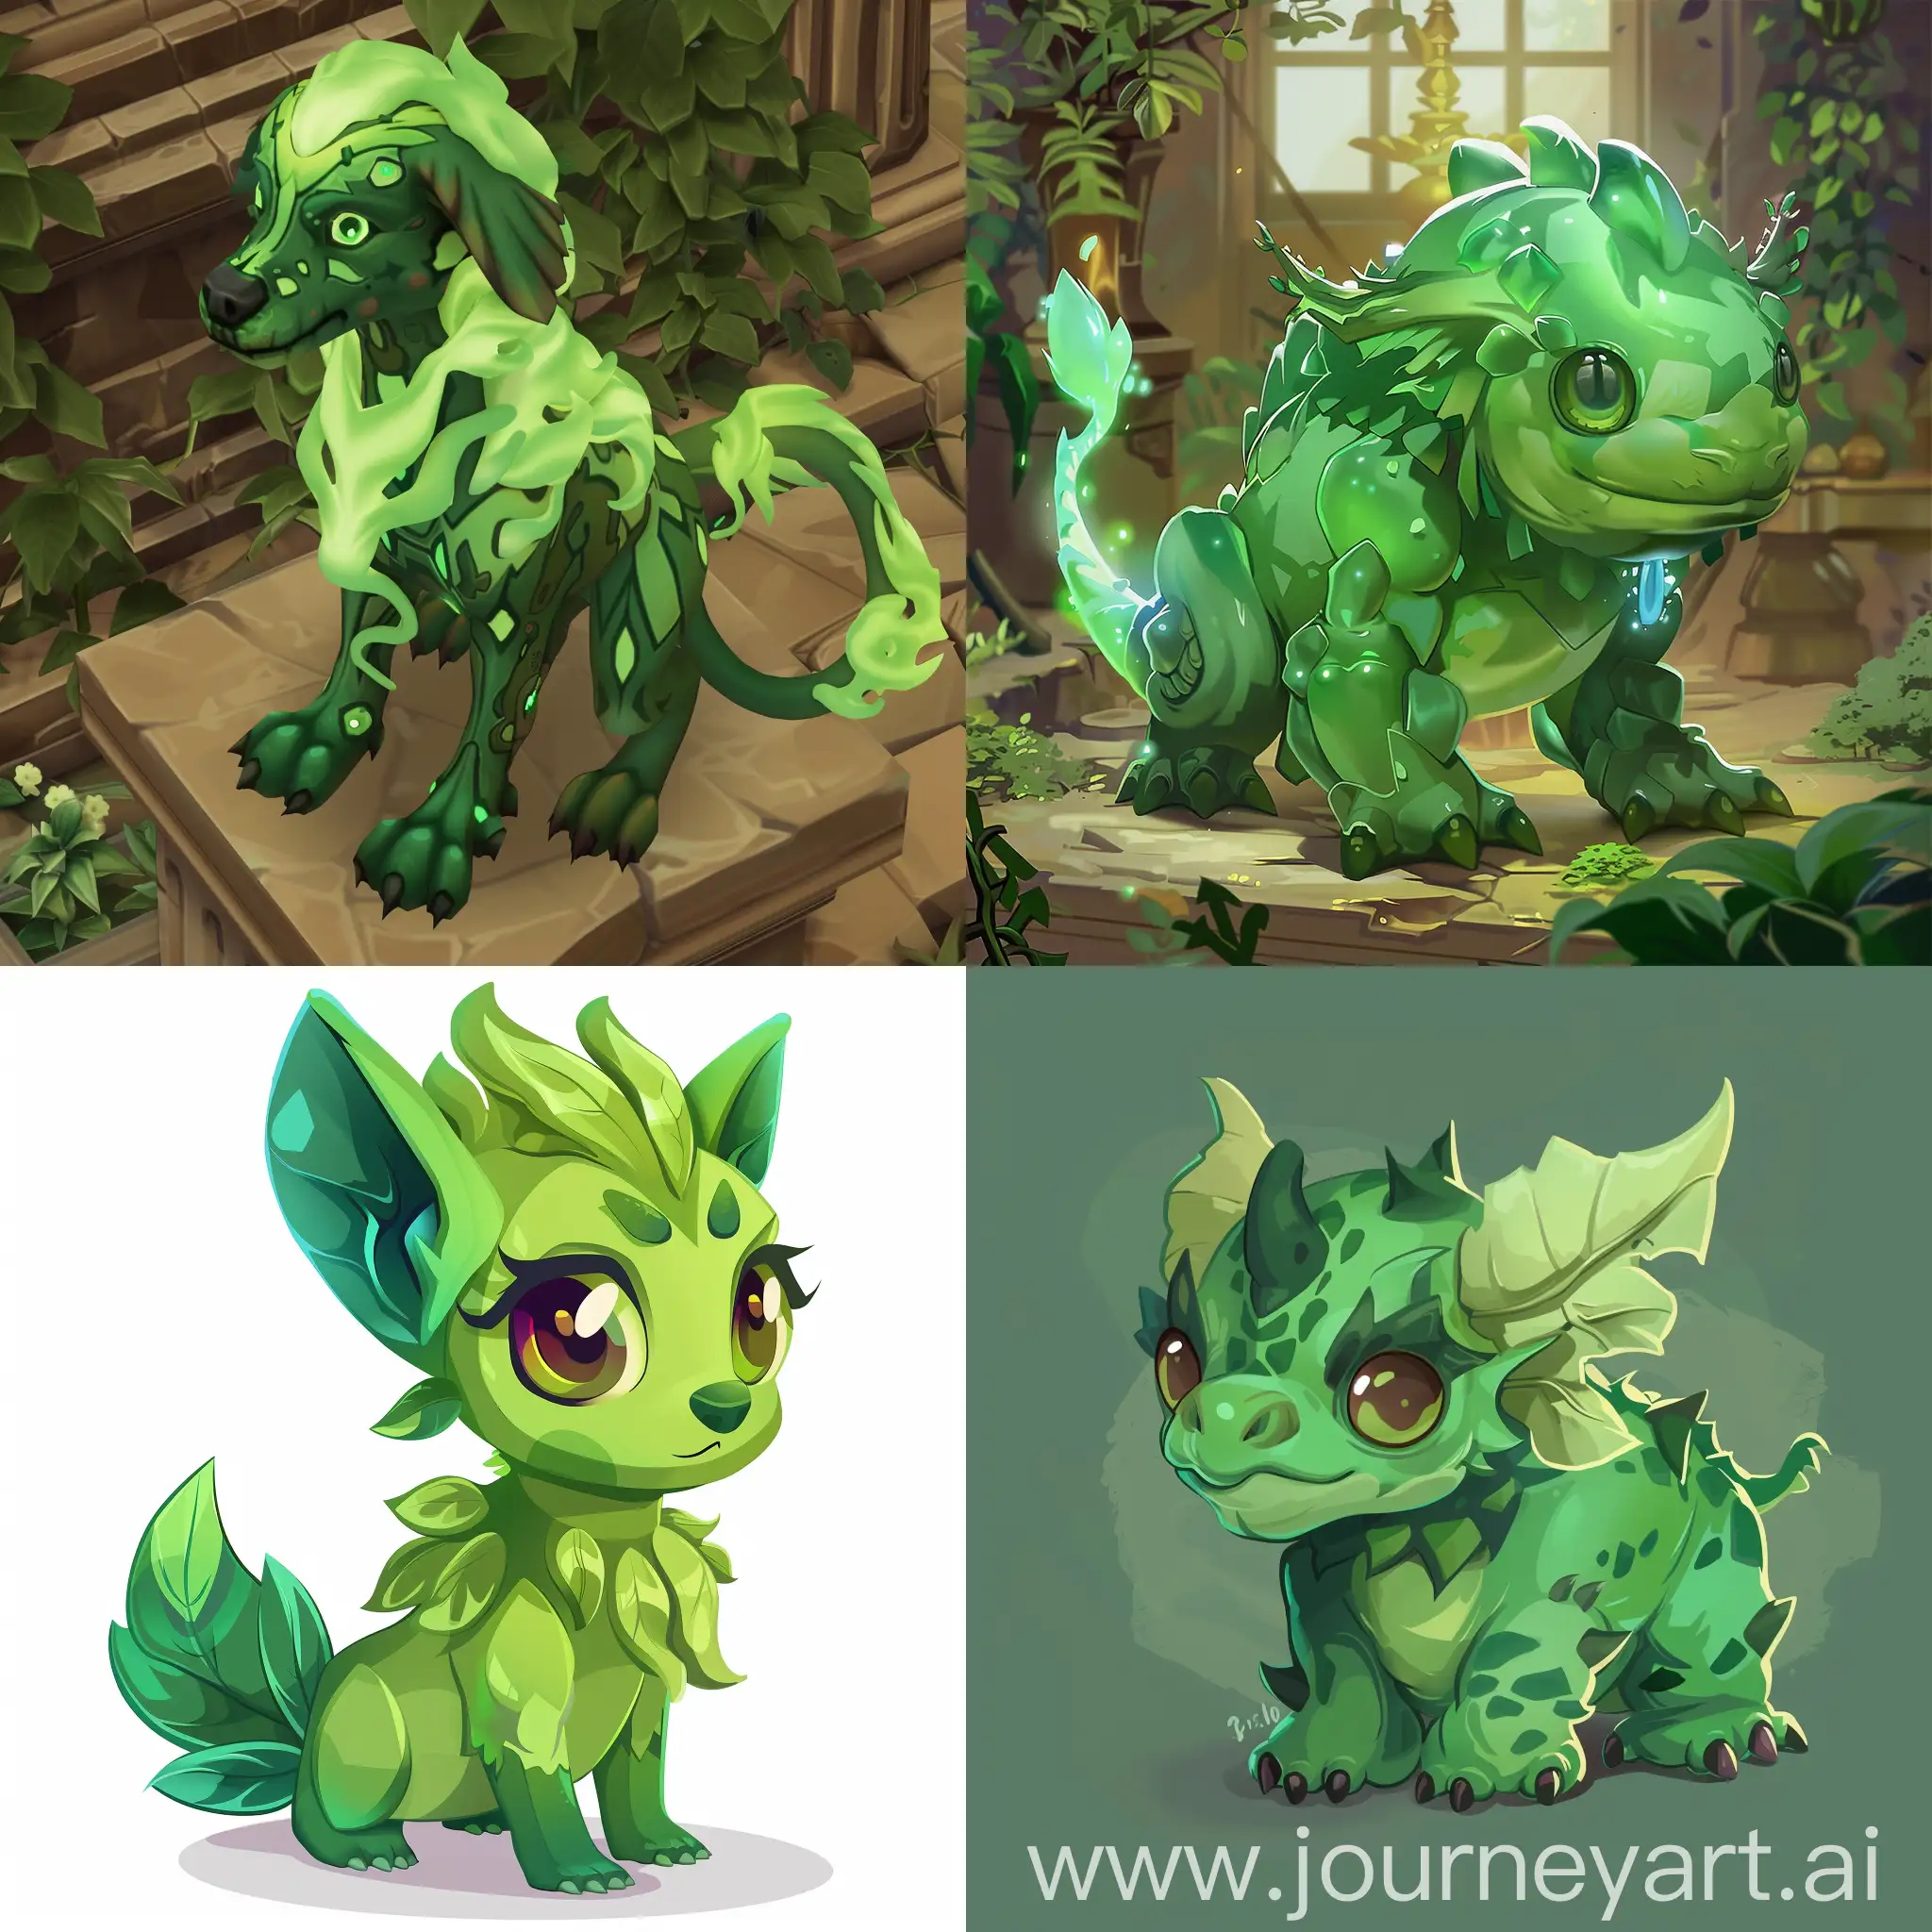 Evolved-Green-Pichon-from-Dofus-Majestic-Creature-in-Verdant-Hue